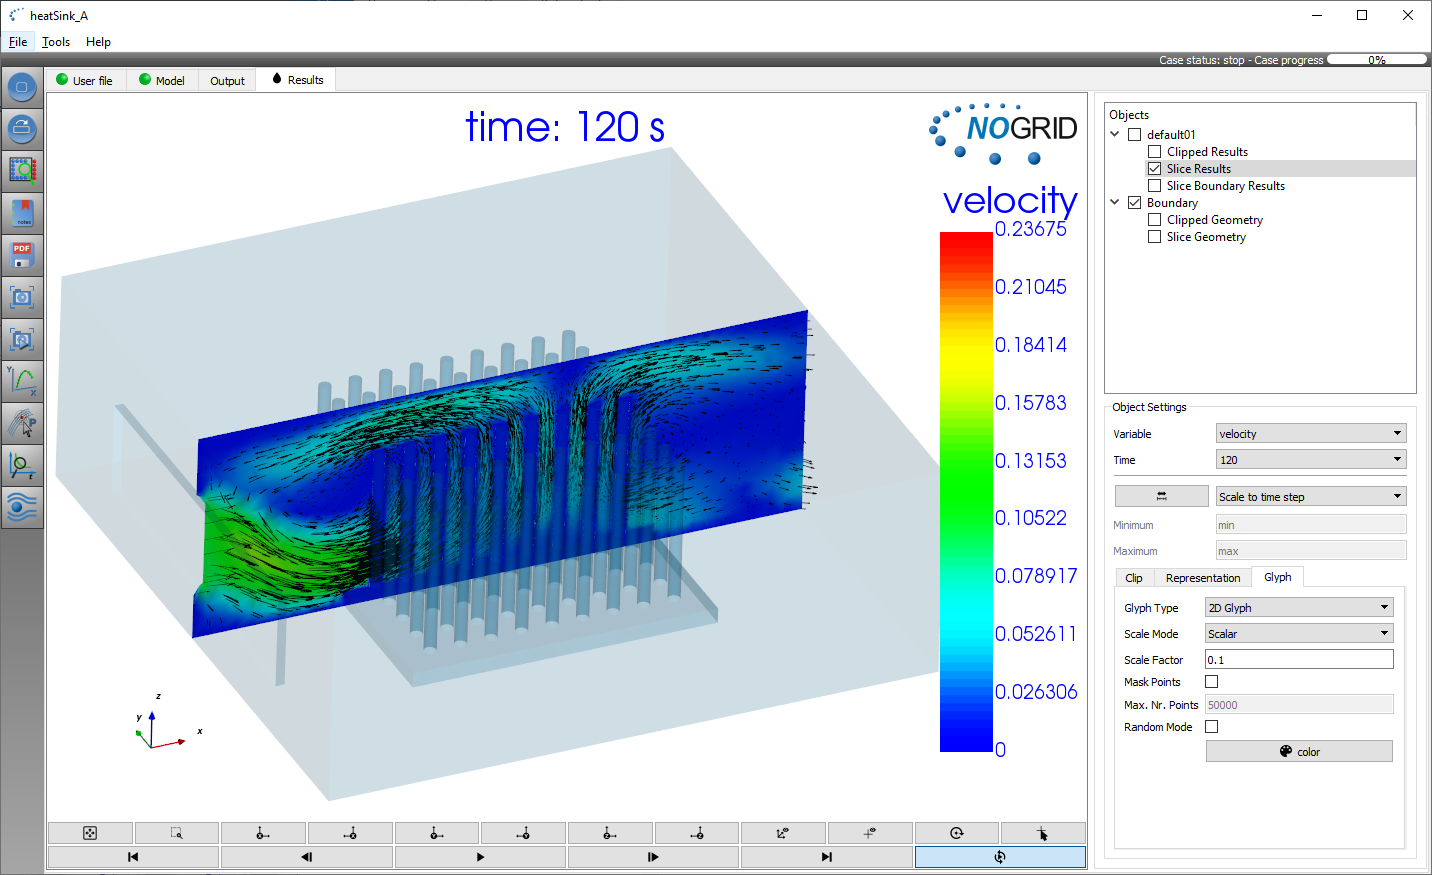 Velocity for air flow in the heat sink in NOGRID points' GUI